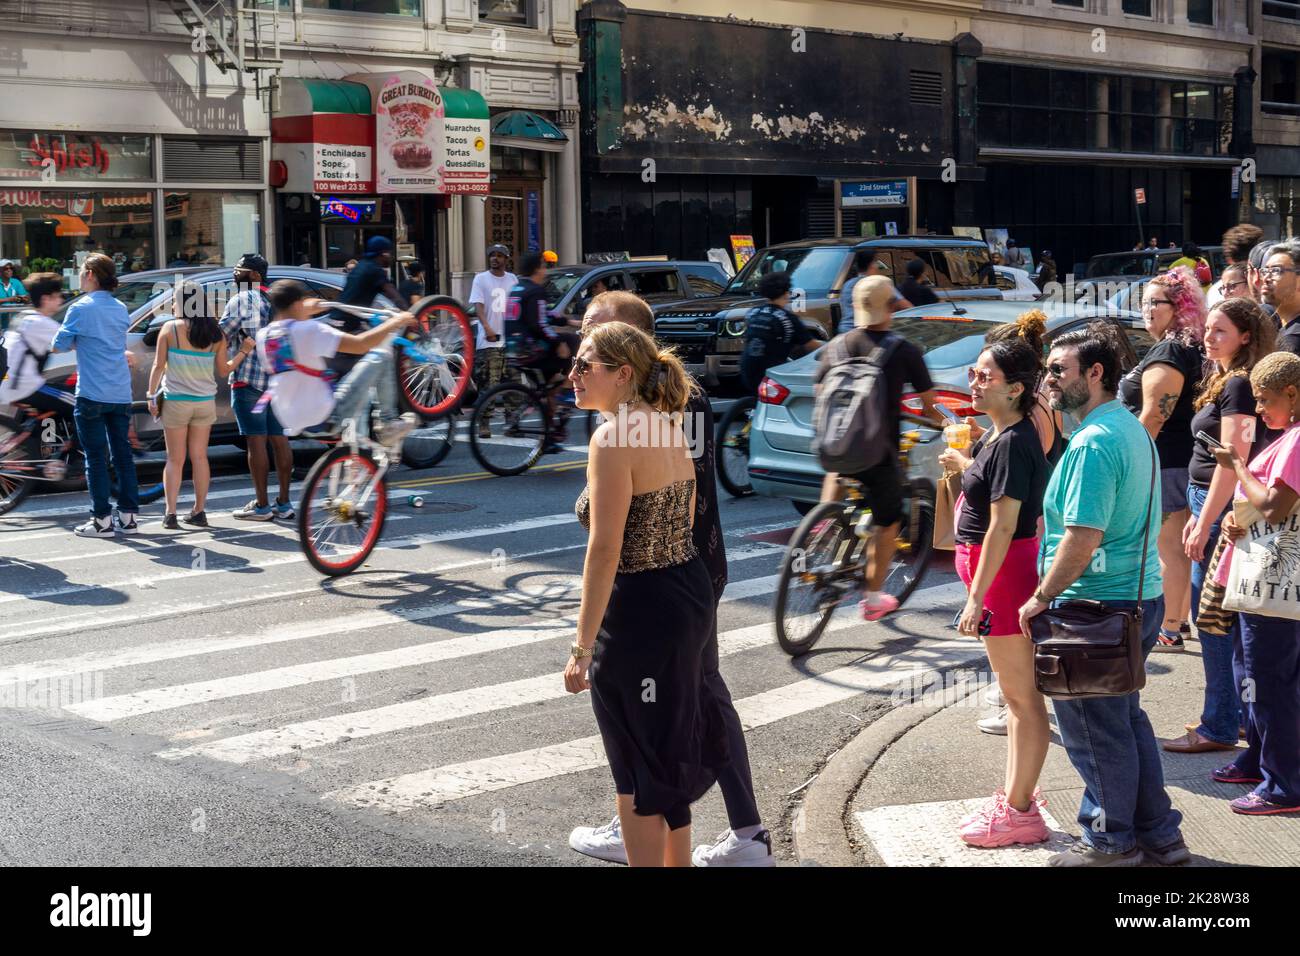 Hundreds of people on bicycles and motorized scooters take over the West 23rd Street road and sidewalk in Chelsea in New York as they travel in a pack on Sunday, September 18, 2022. (© Richard B. Levine) Stock Photo